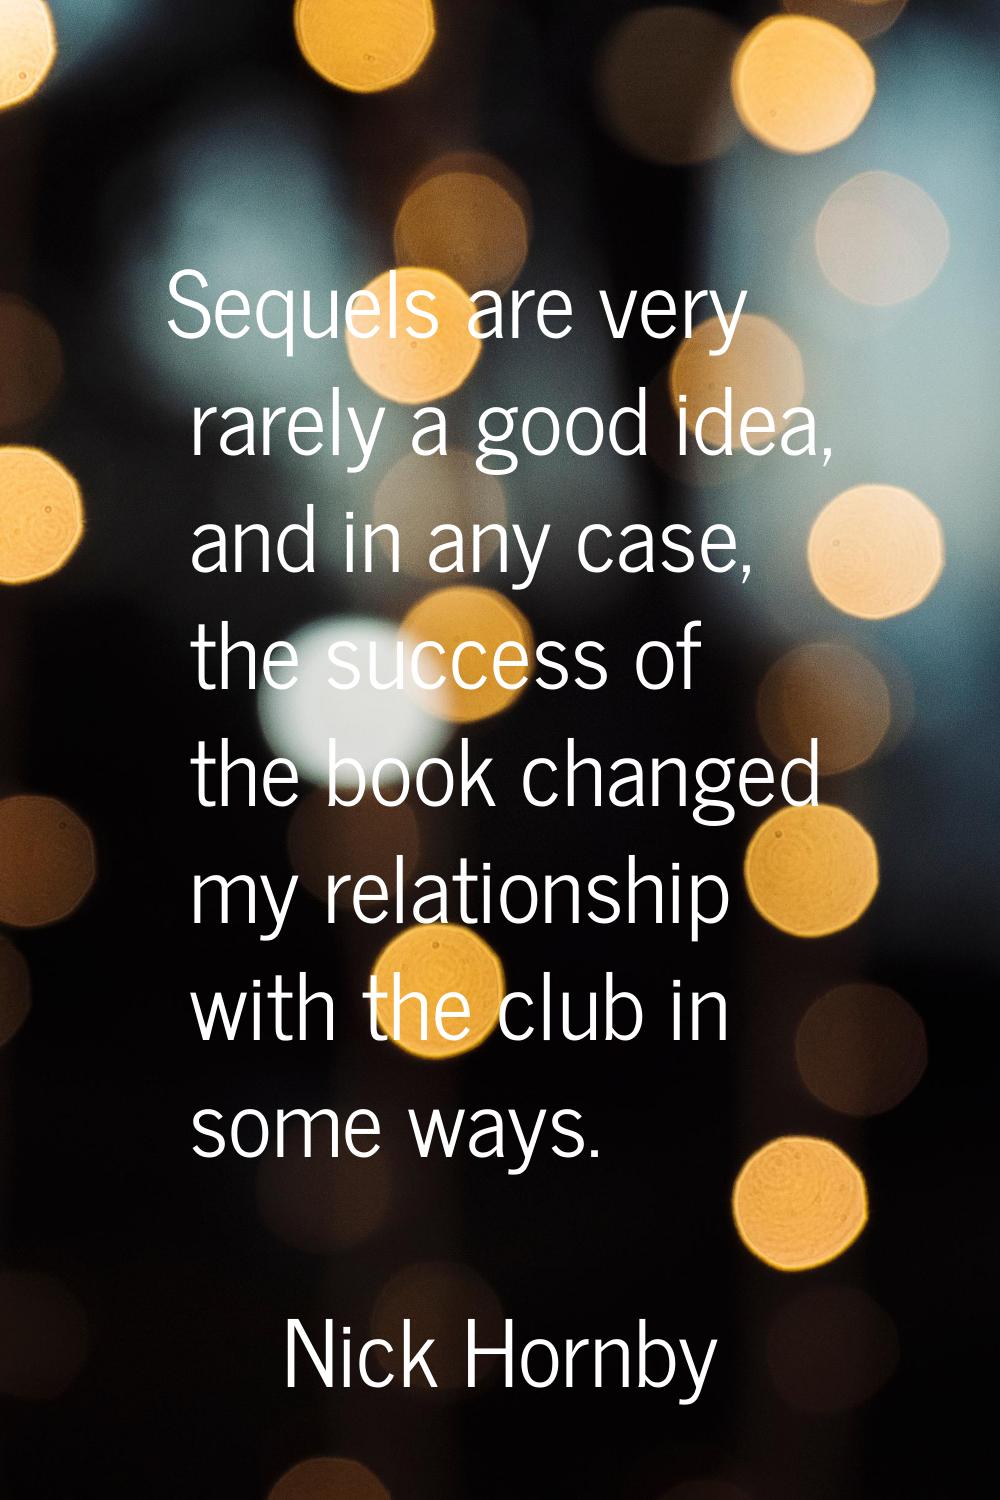 Sequels are very rarely a good idea, and in any case, the success of the book changed my relationsh